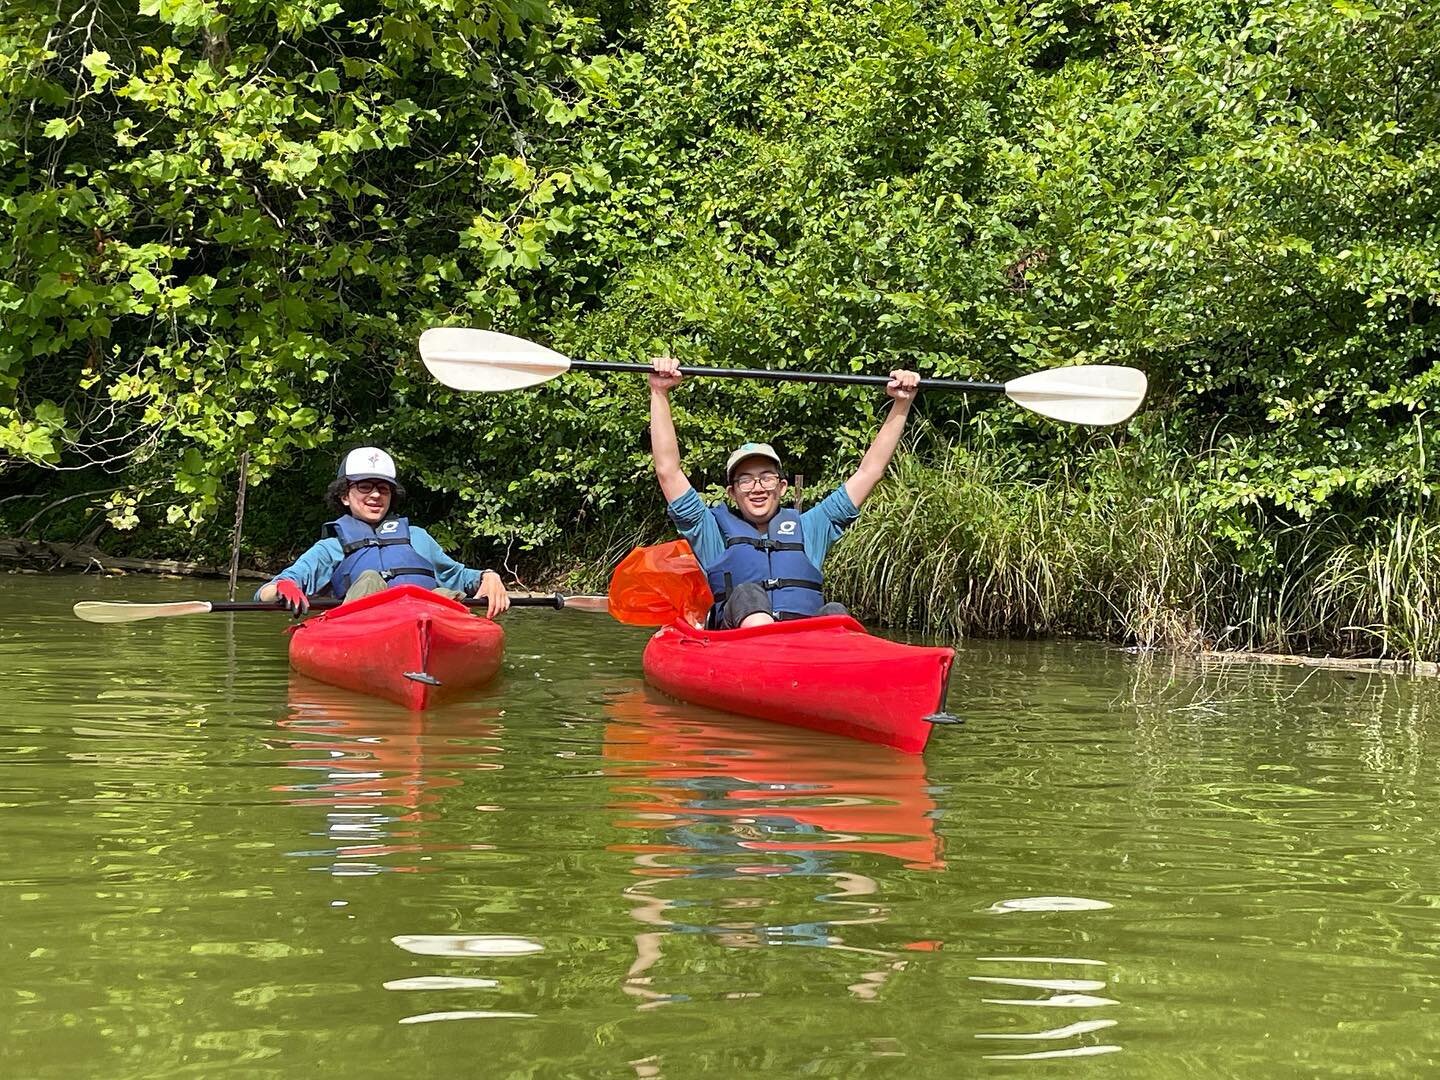 The MoCo crew Kayaking at Rock Creek Regional Park picking up trash found in the upper section of the watershed! #LoveRockCreek #RC3 #RockCreek #RockCreekPark